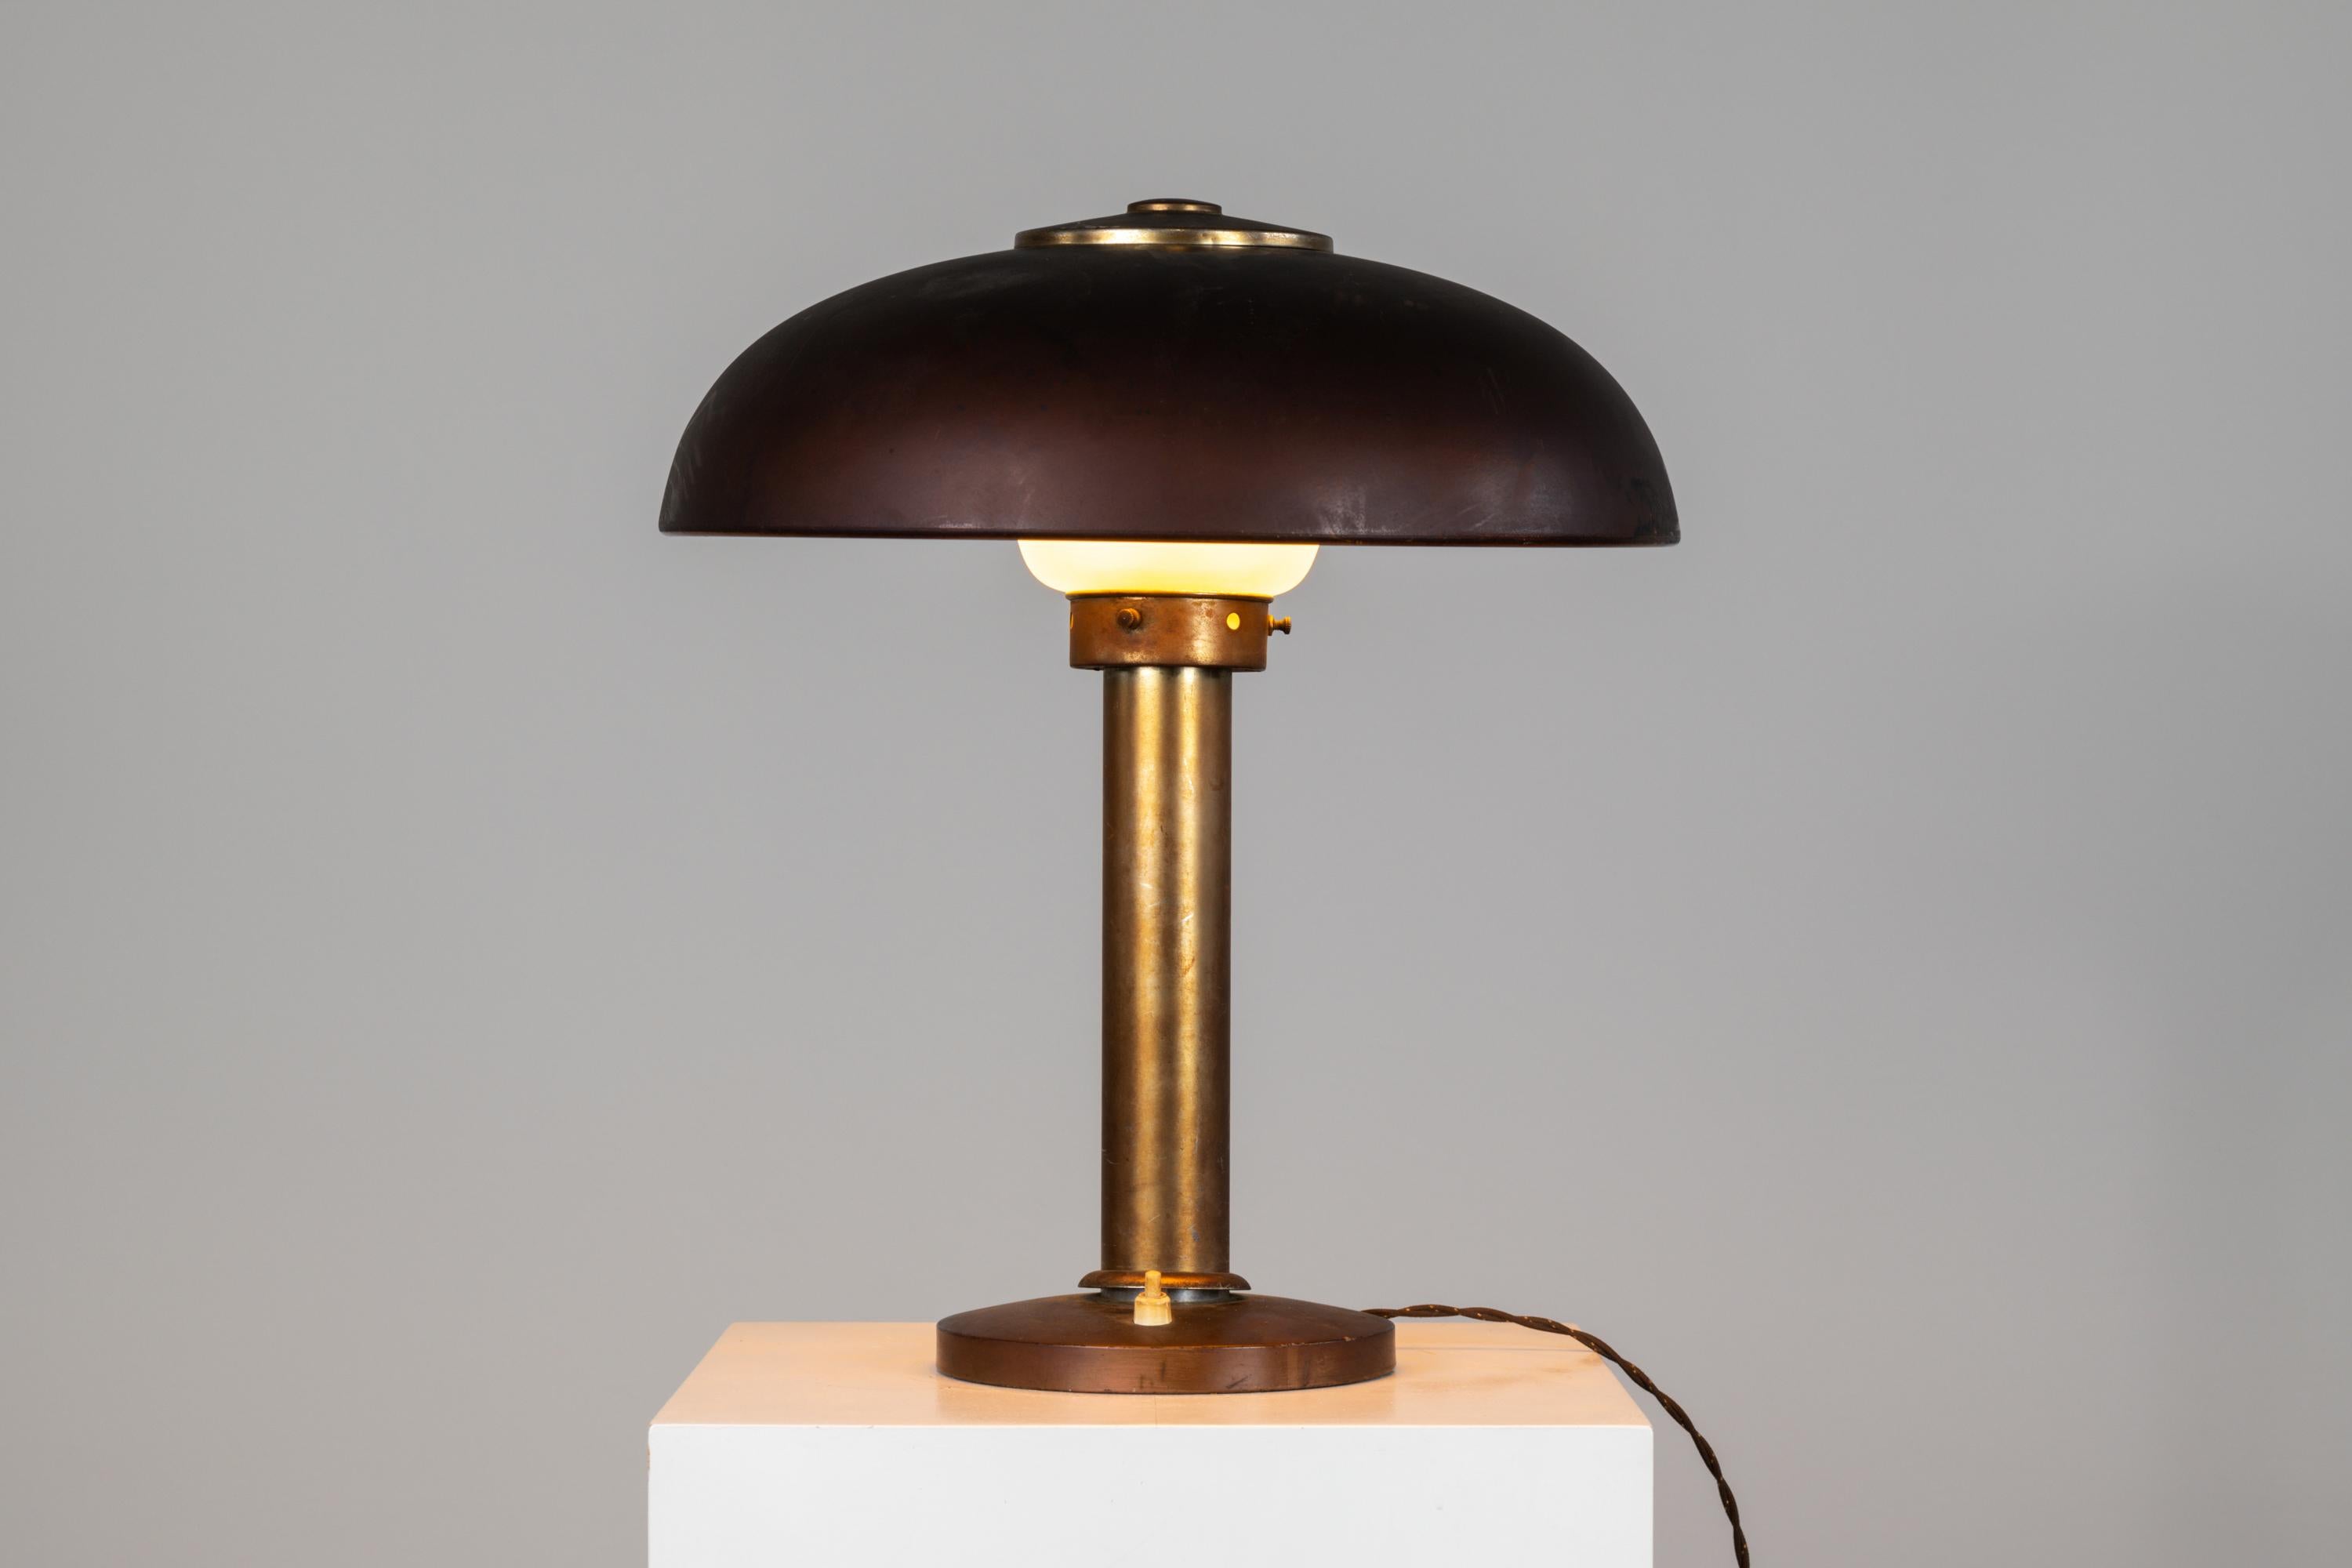 Exquisite table lamp in aluminium designed by Gio Ponti for Pollice in 1940s.
Available with expertise released by Gio Ponti Archives.
 